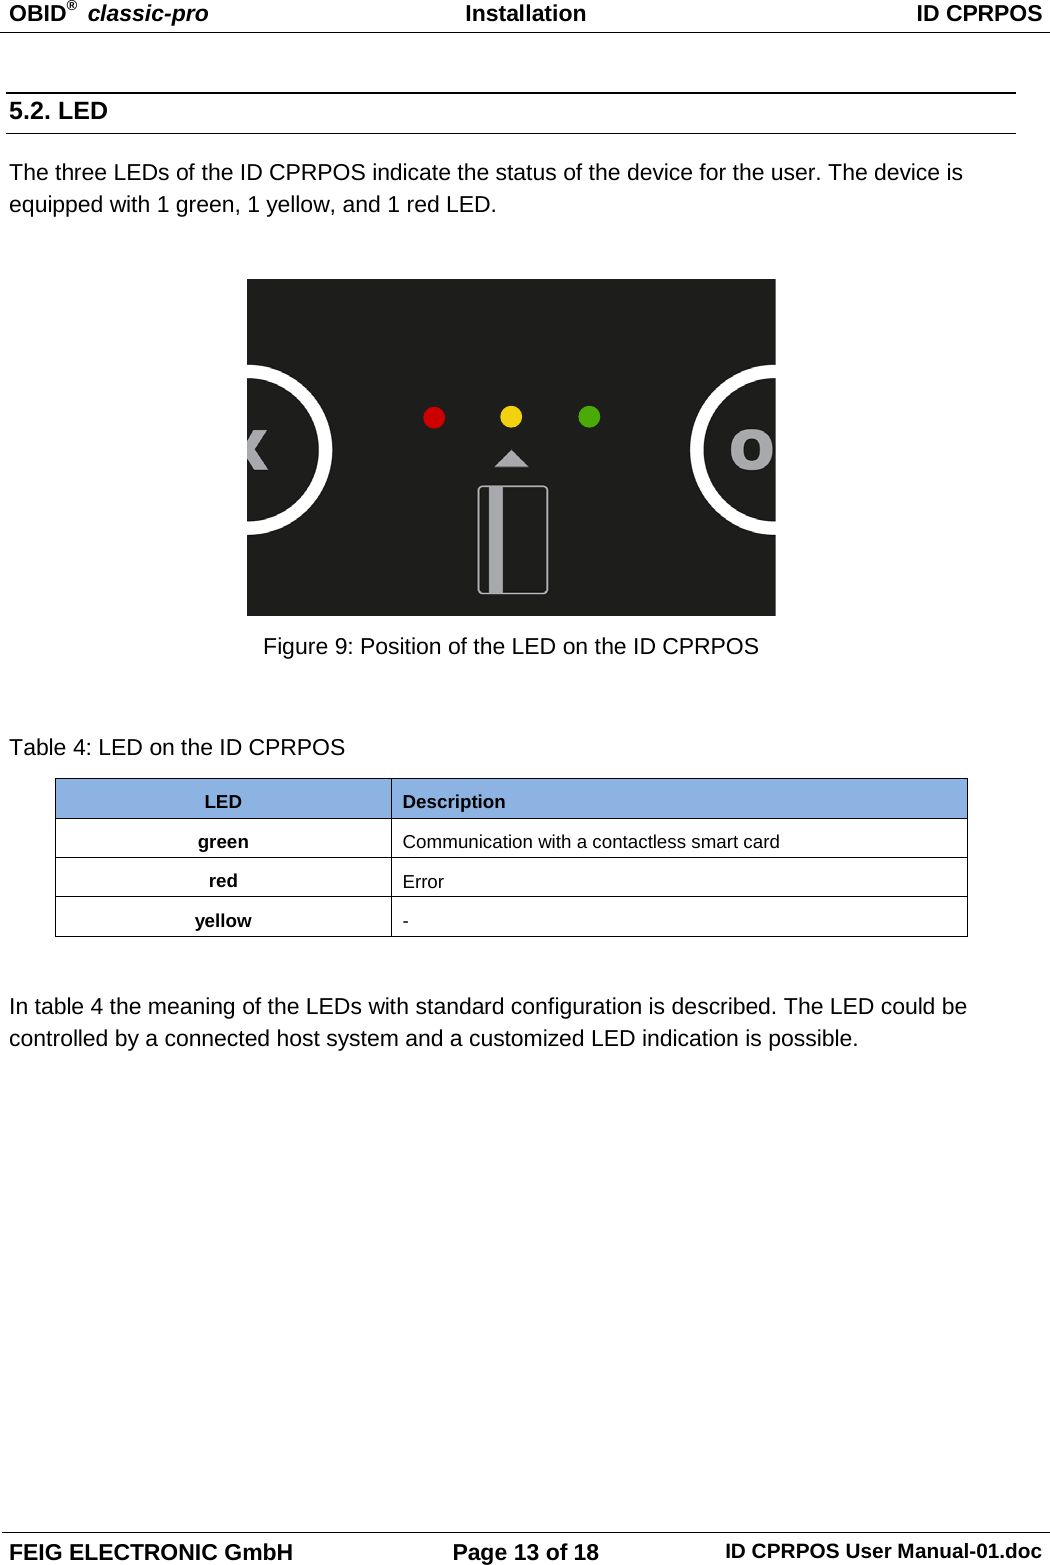 OBID®  classic-pro Installation ID CPRPOS  FEIG ELECTRONIC GmbH Page 13 of 18 ID CPRPOS User Manual-01.doc  5.2. LED The three LEDs of the ID CPRPOS indicate the status of the device for the user. The device is equipped with 1 green, 1 yellow, and 1 red LED.   Figure 9: Position of the LED on the ID CPRPOS  Table 4: LED on the ID CPRPOS LED  Description green Communication with a contactless smart card red Error yellow -  In table 4 the meaning of the LEDs with standard configuration is described. The LED could be controlled by a connected host system and a customized LED indication is possible.  